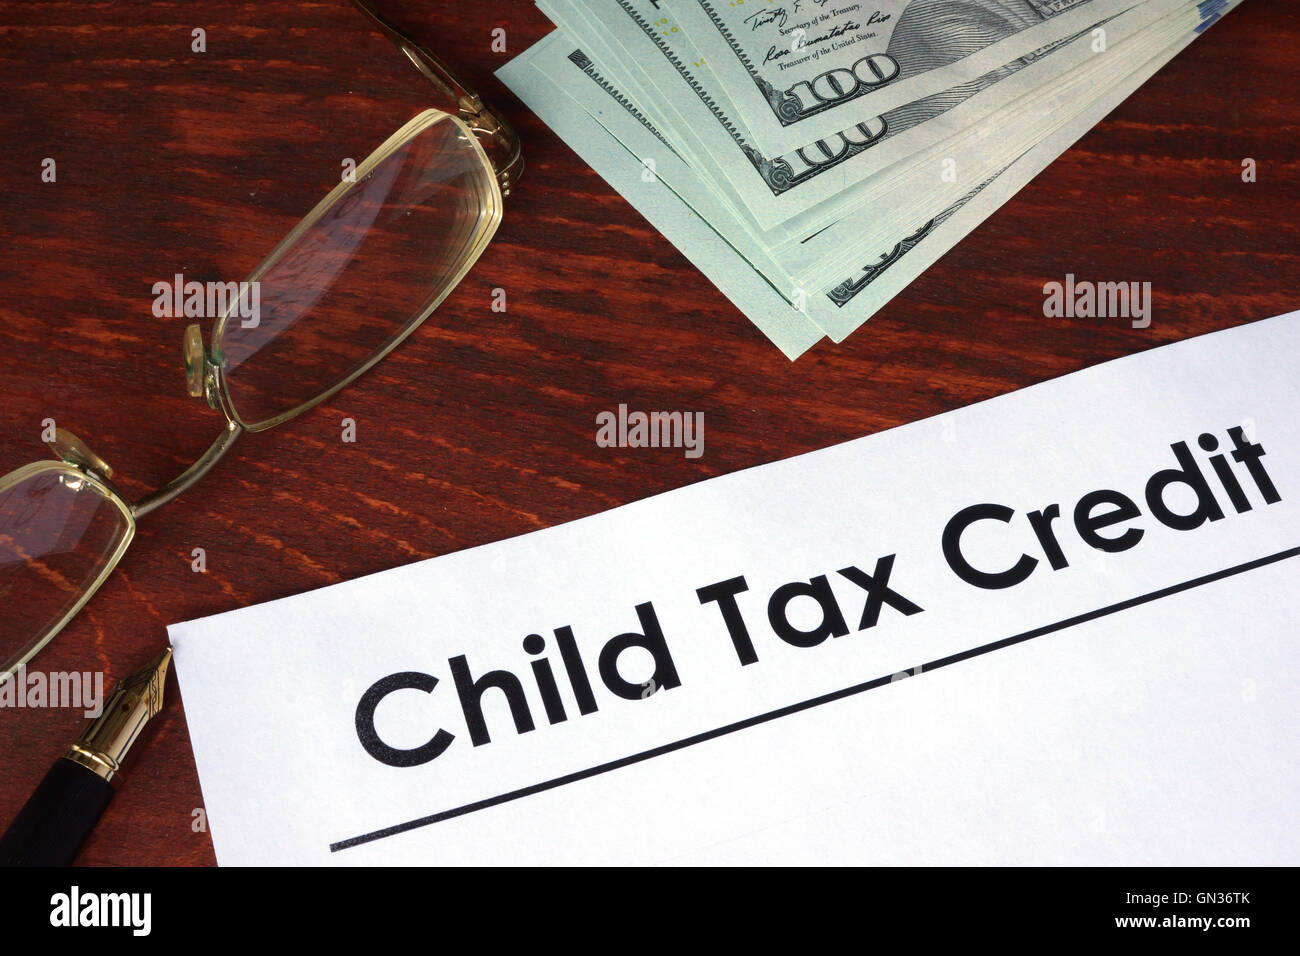 Child tax credit written on a paper. Financial concept. Stock Photo